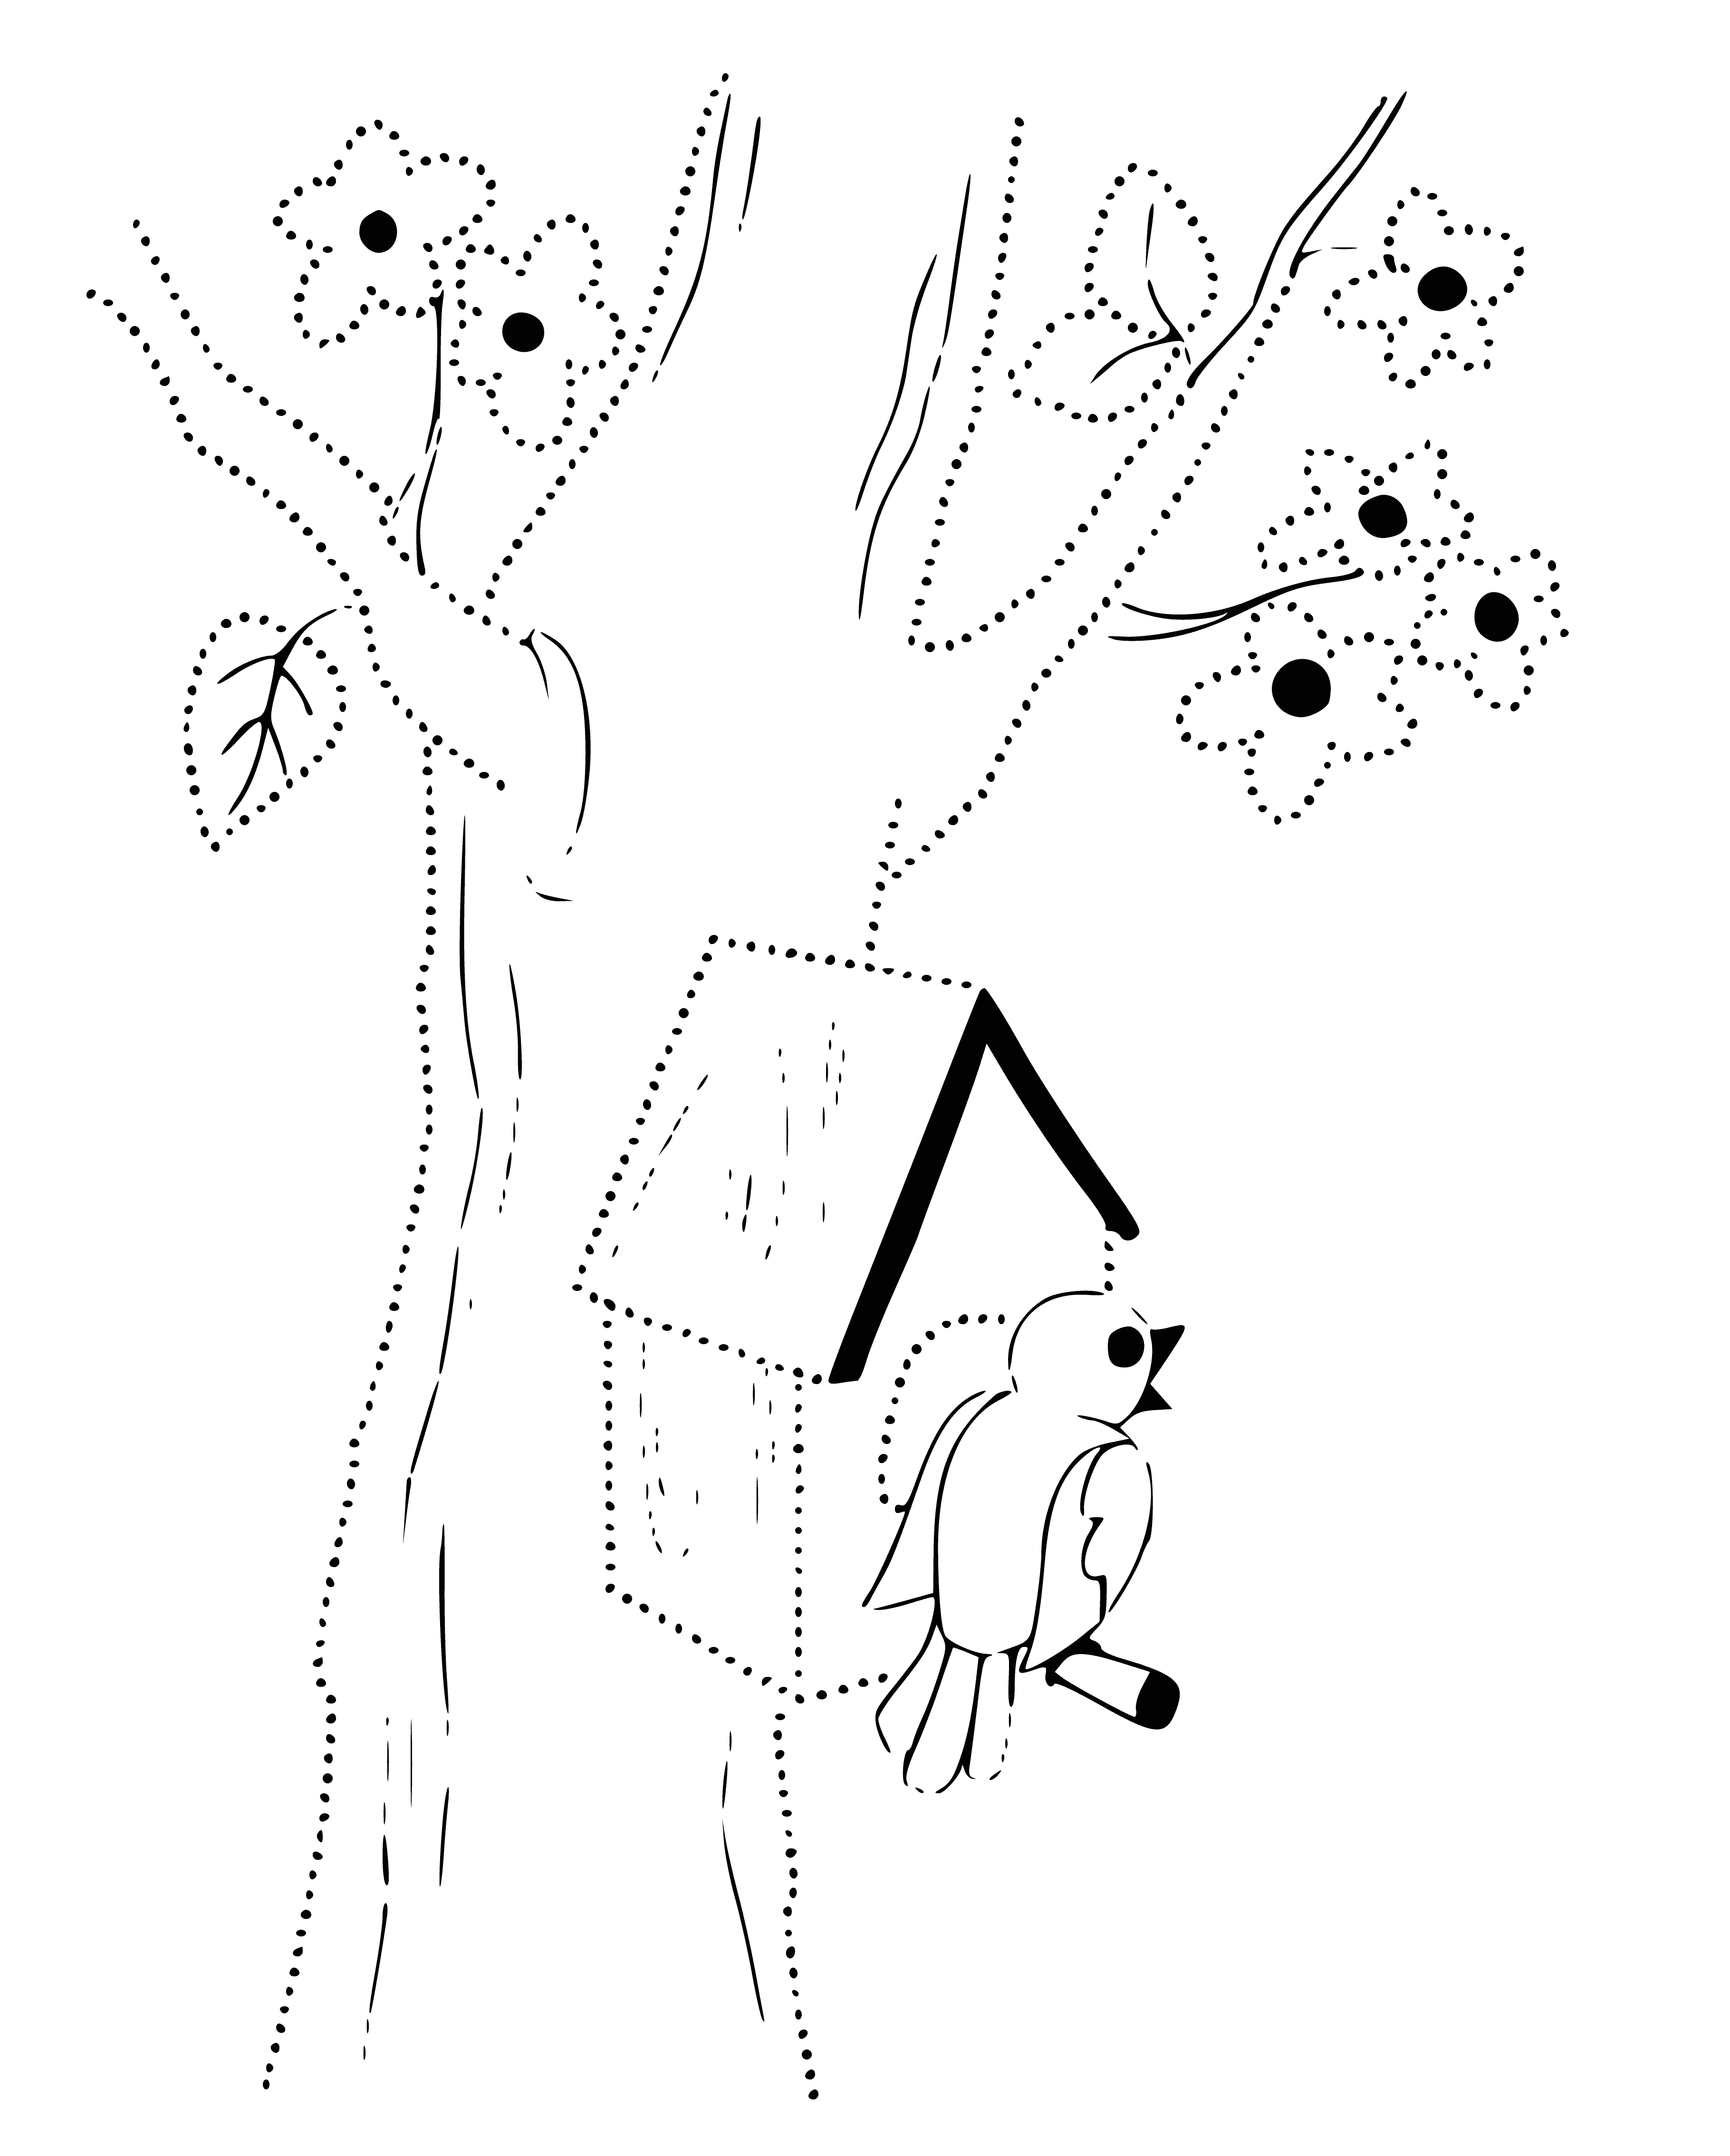 coloring page: A birdhouse on a green tree with pink & purple flowers, a blue bird w/ yellow beak on it.